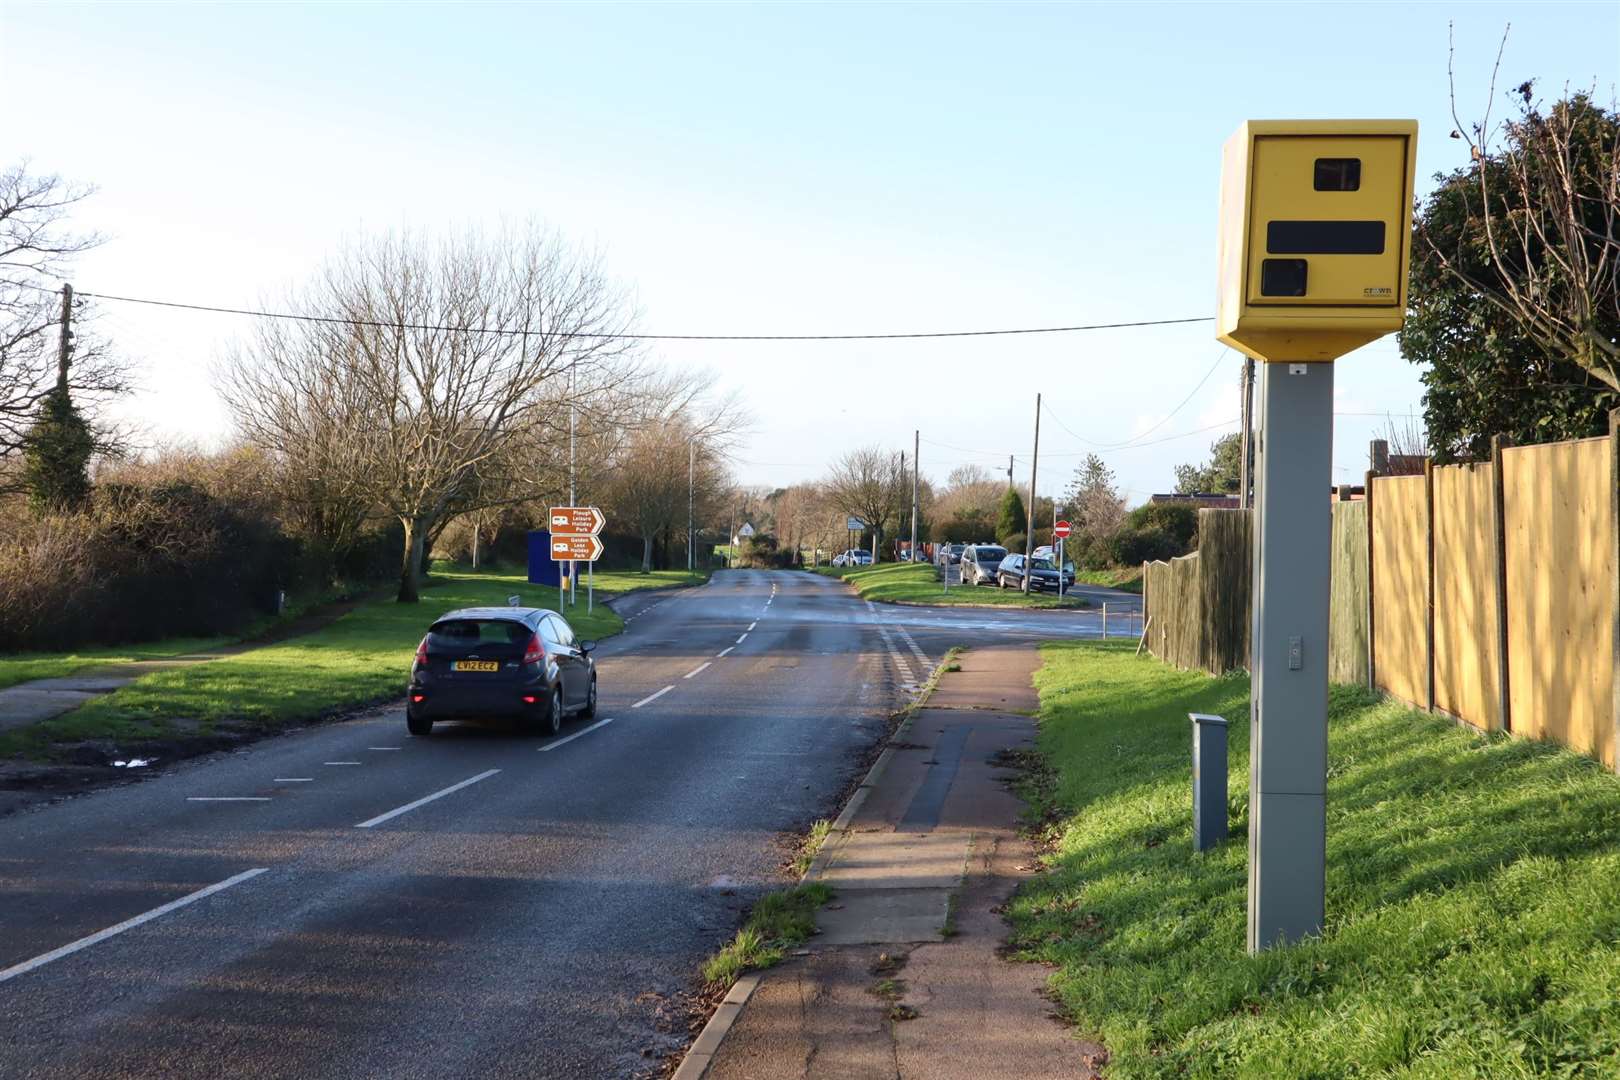 There are more than 100 fixed speed cameras in the county